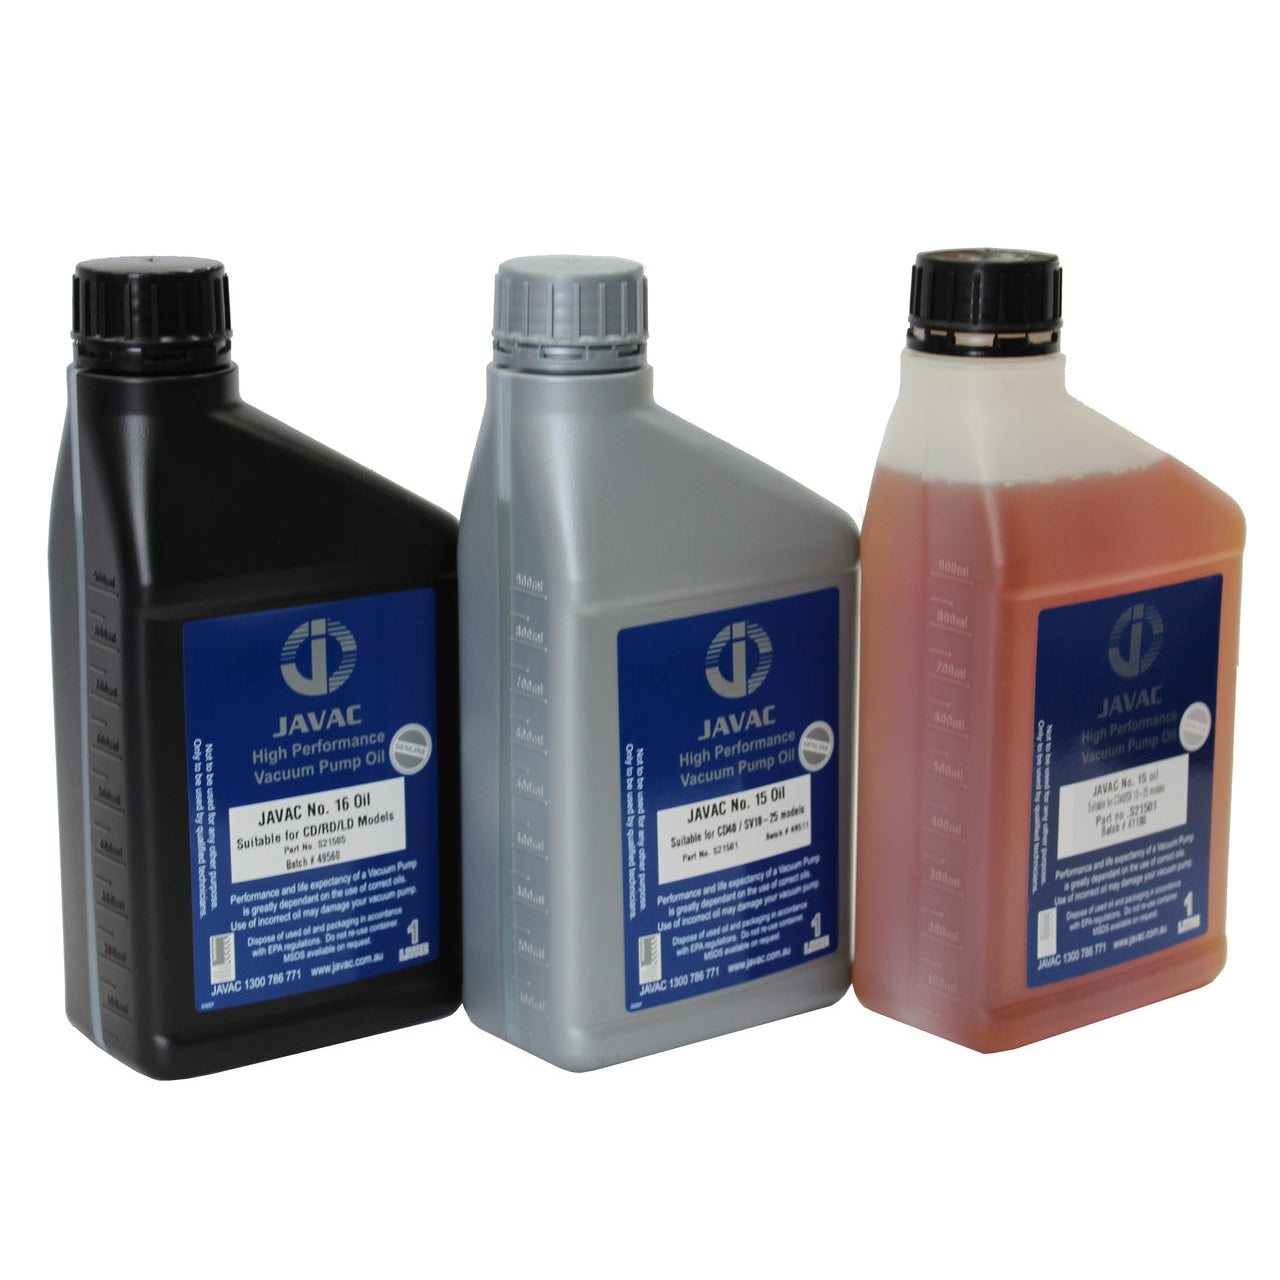 JAVAC Oils: Shark Oil 1 L + 5 L is also available